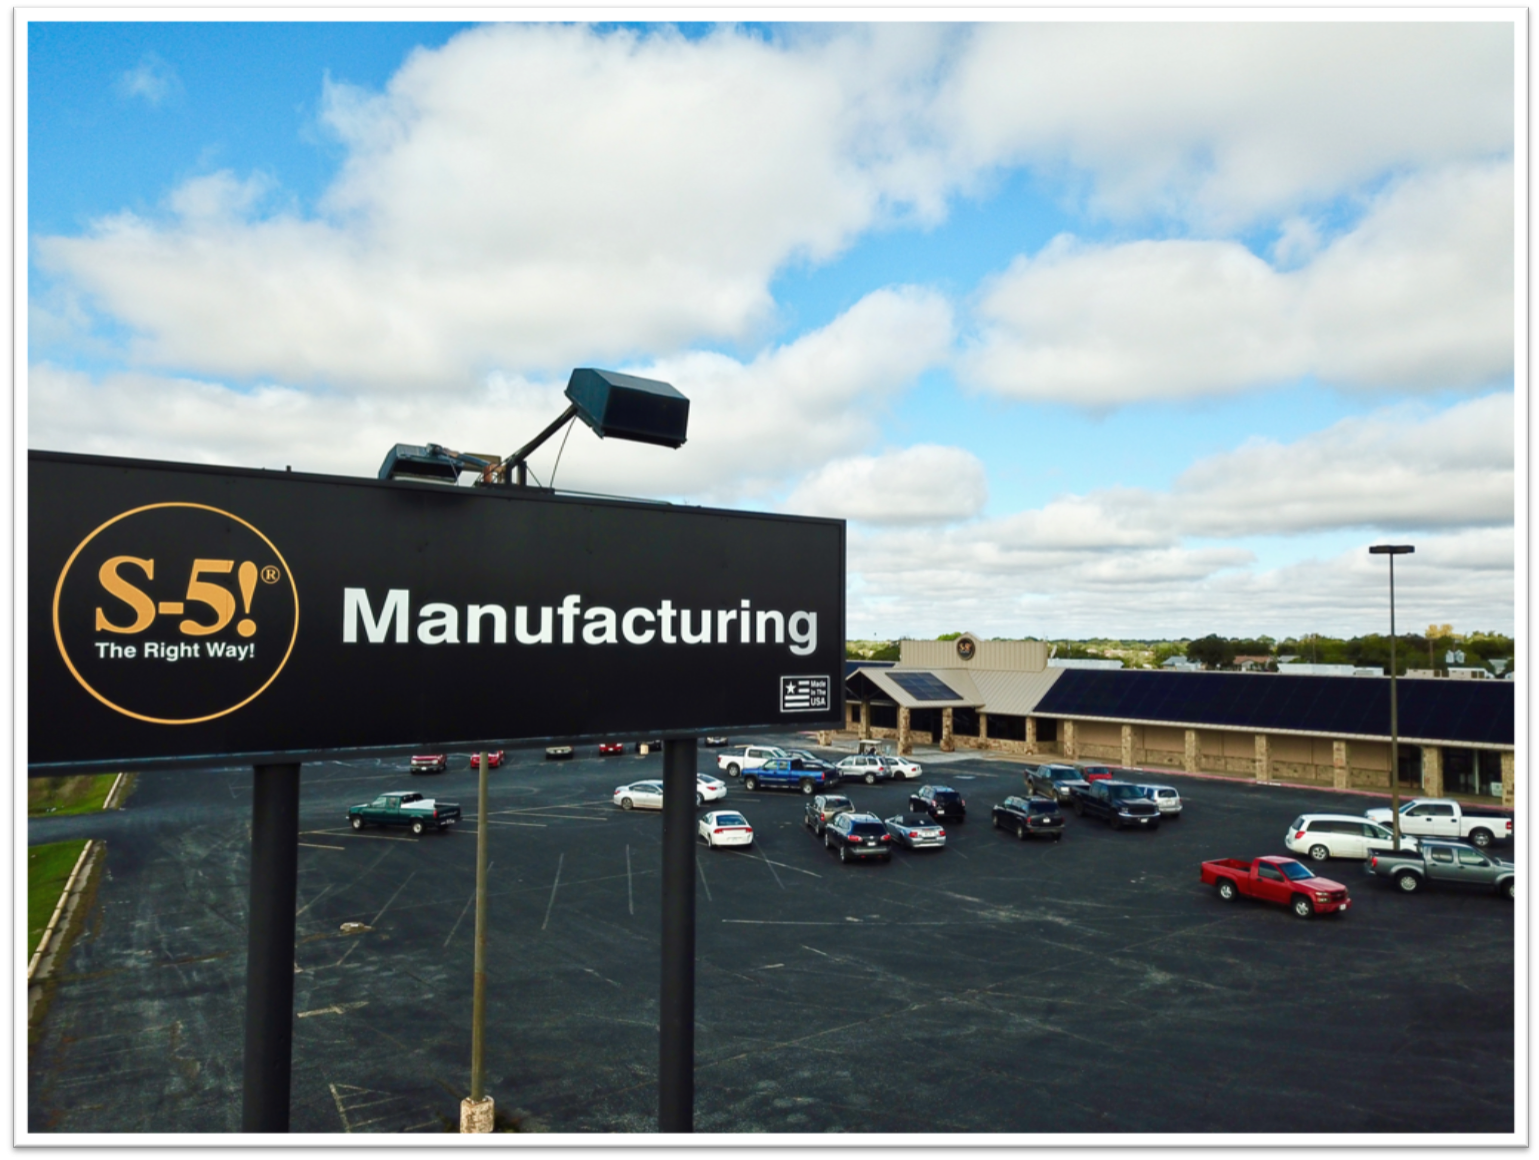 S-5! Manufacturing: How Do You Streamline Manufacturing and Fabrication? (Part 1)